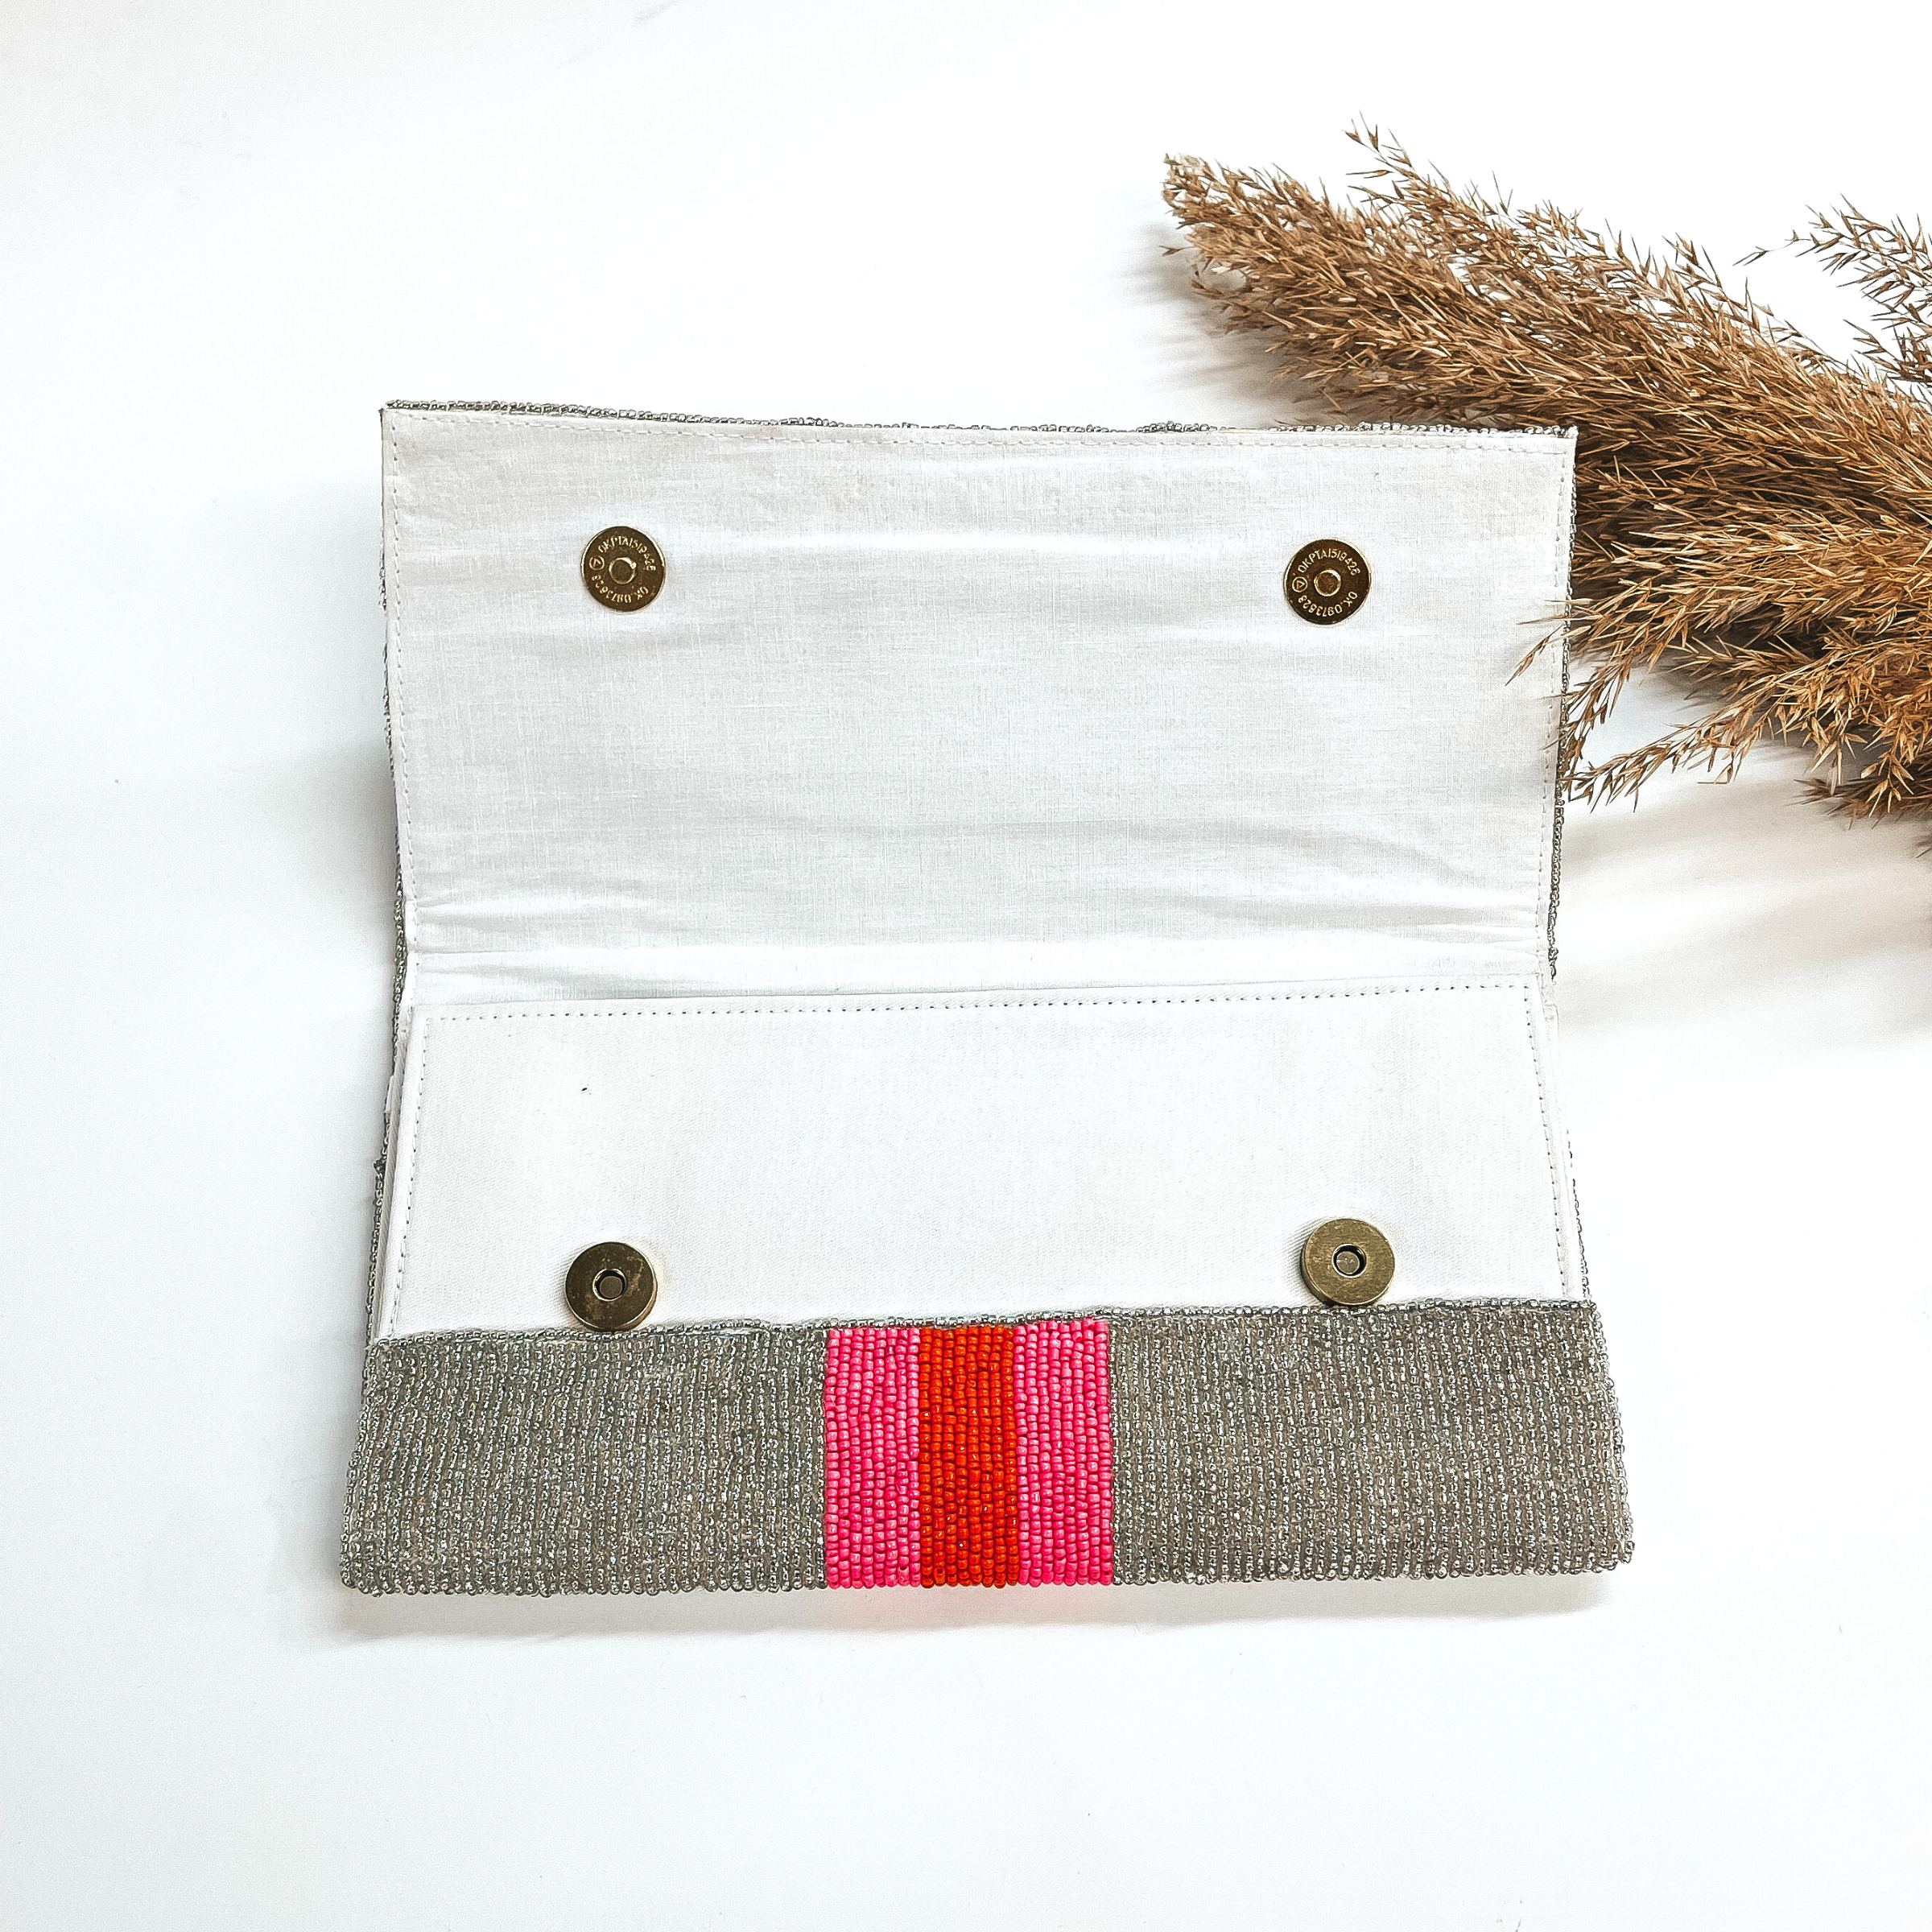 This is the inside of the seedbeaded clutch purse in silver with  three stripes in the middle, two hot pink and one orange line in the middle. This bag  is taken laying on a white background with a brown plant in the side as decor.